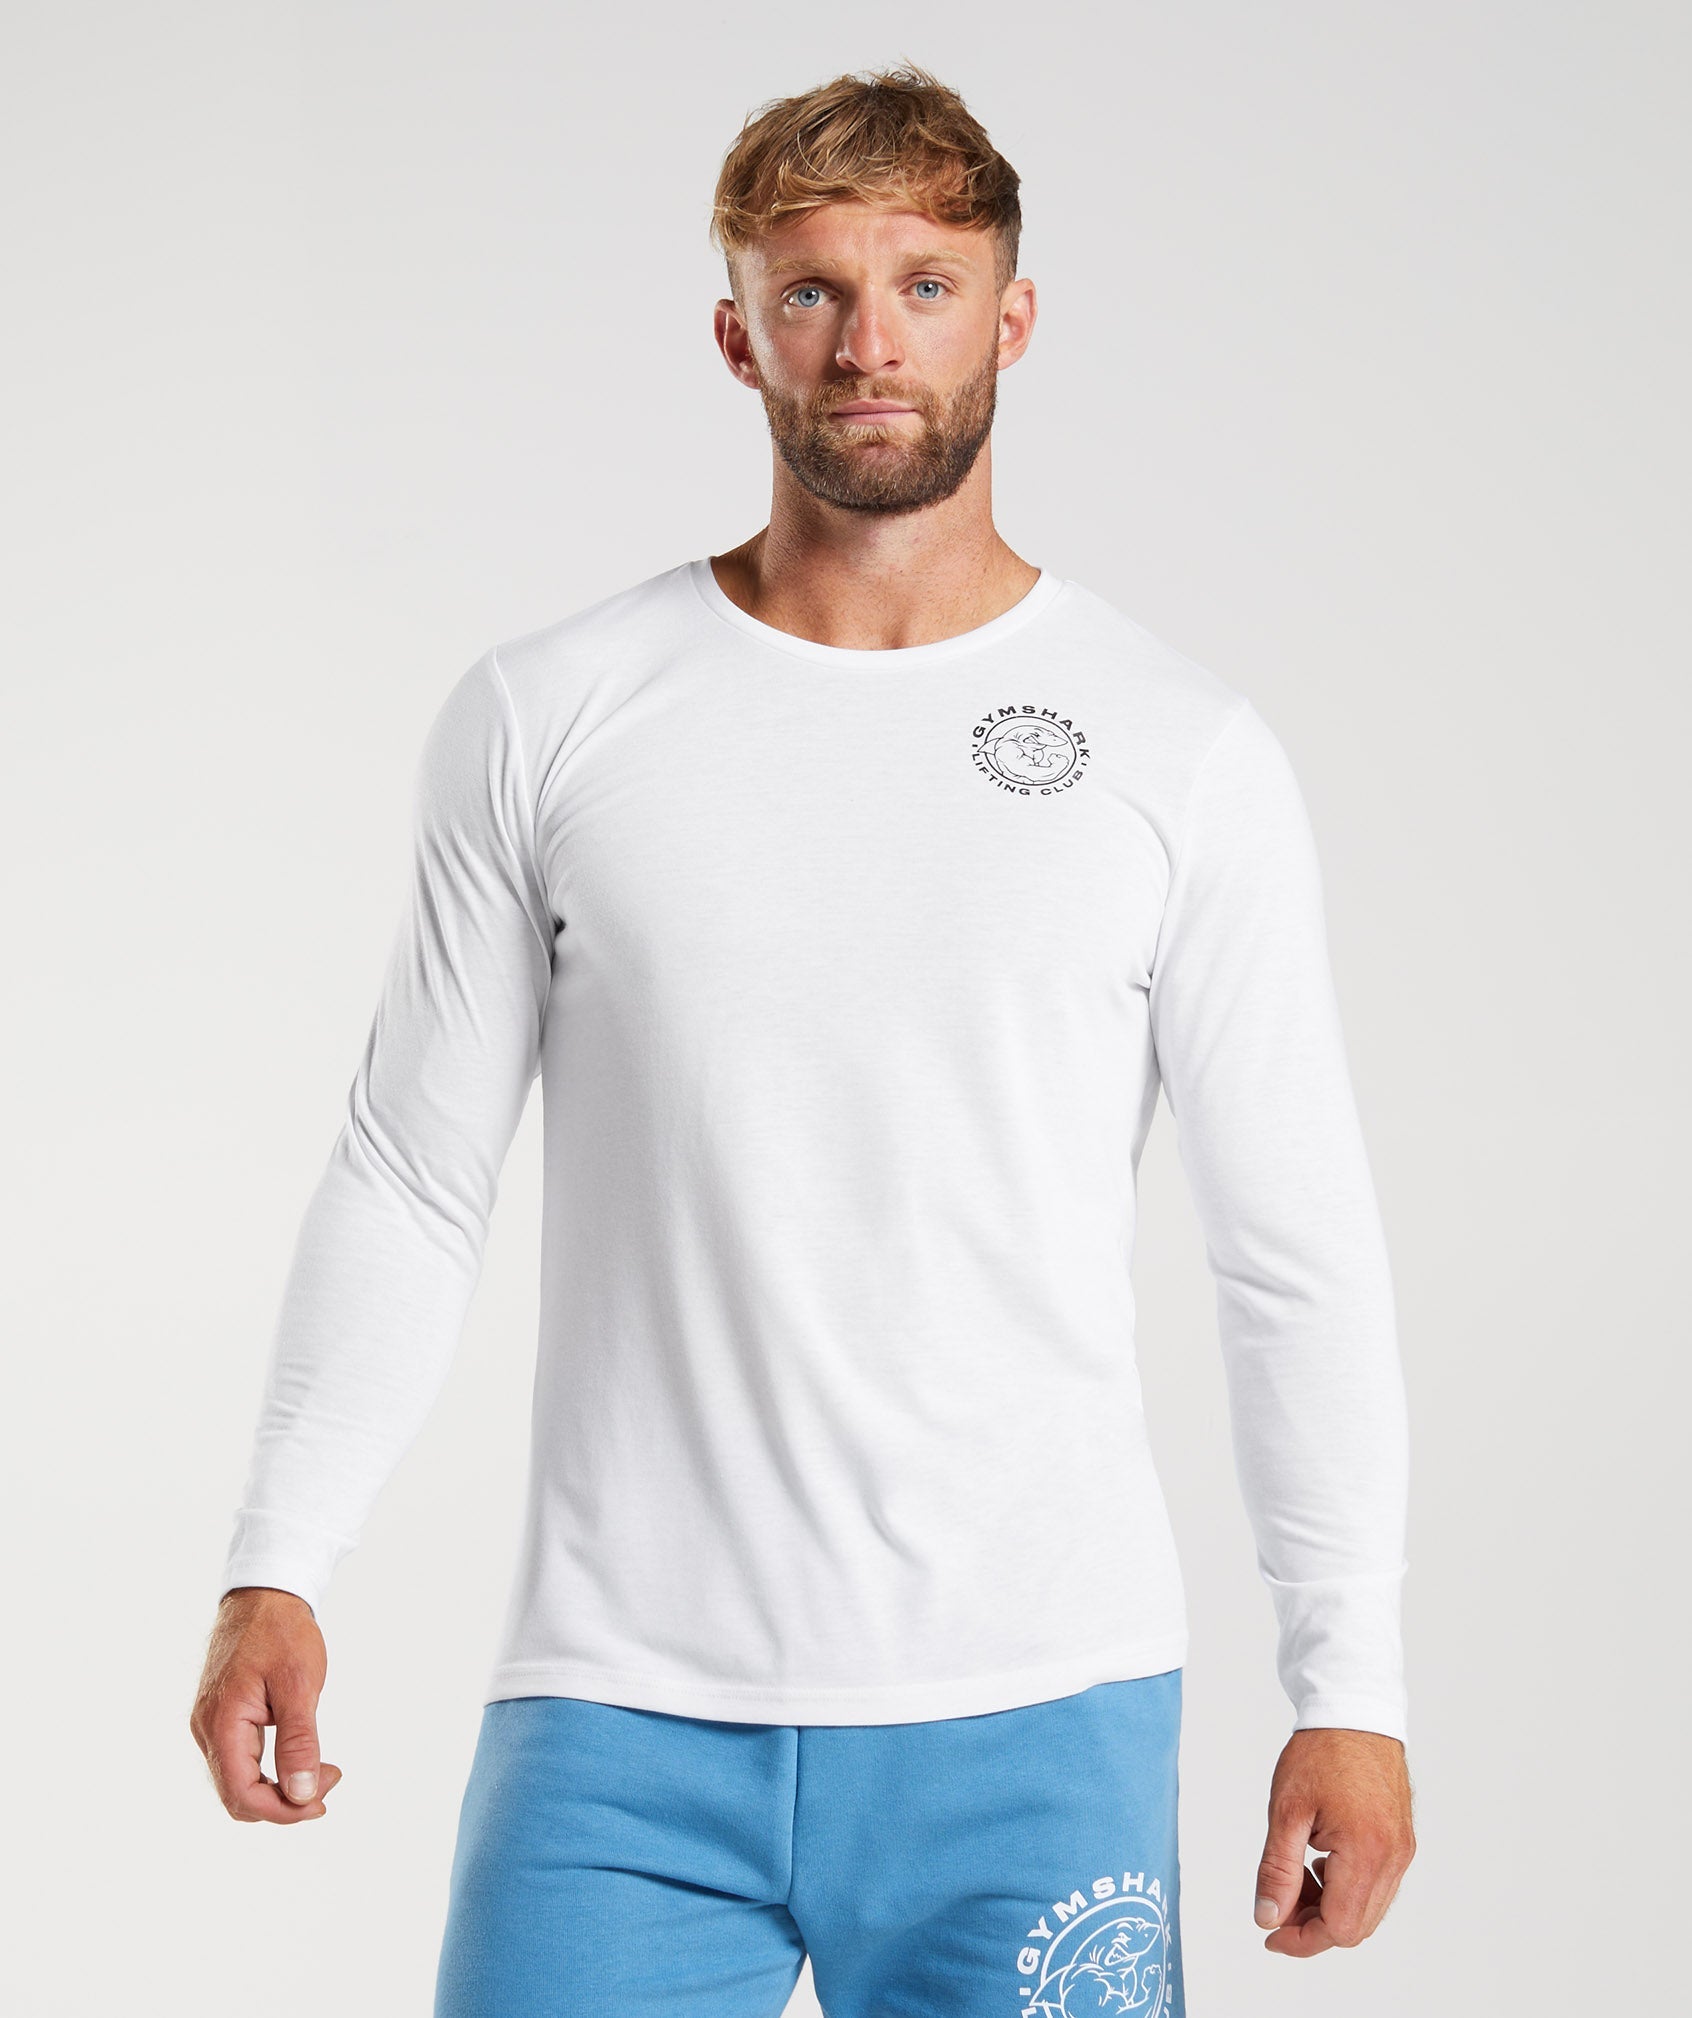 Gymshark Cotton Athletic Long Sleeve Shirts for Men